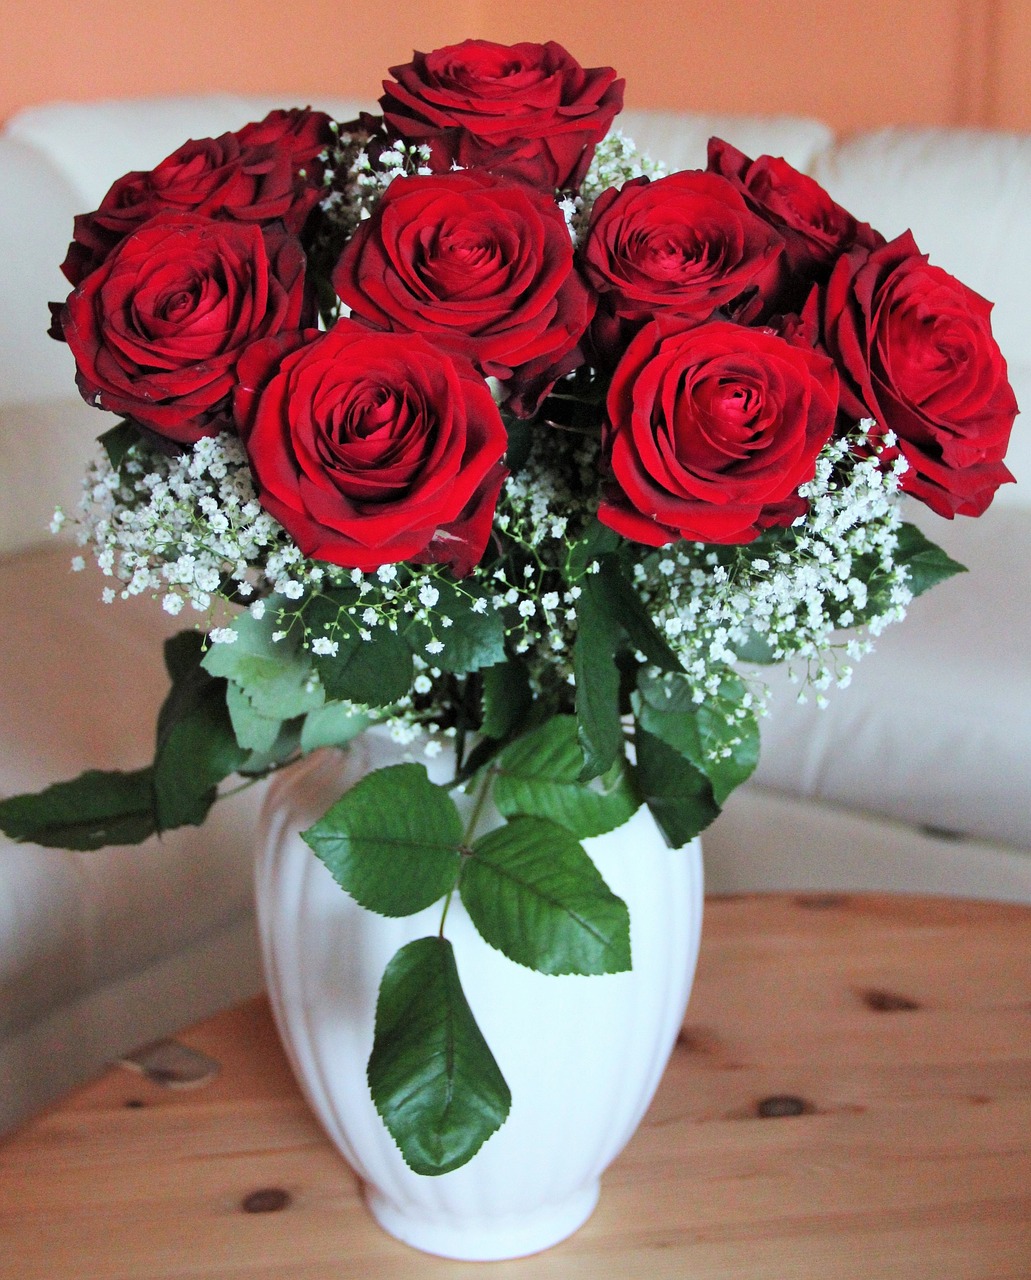 bouquet of roses baccara roses he loved flowers free photo